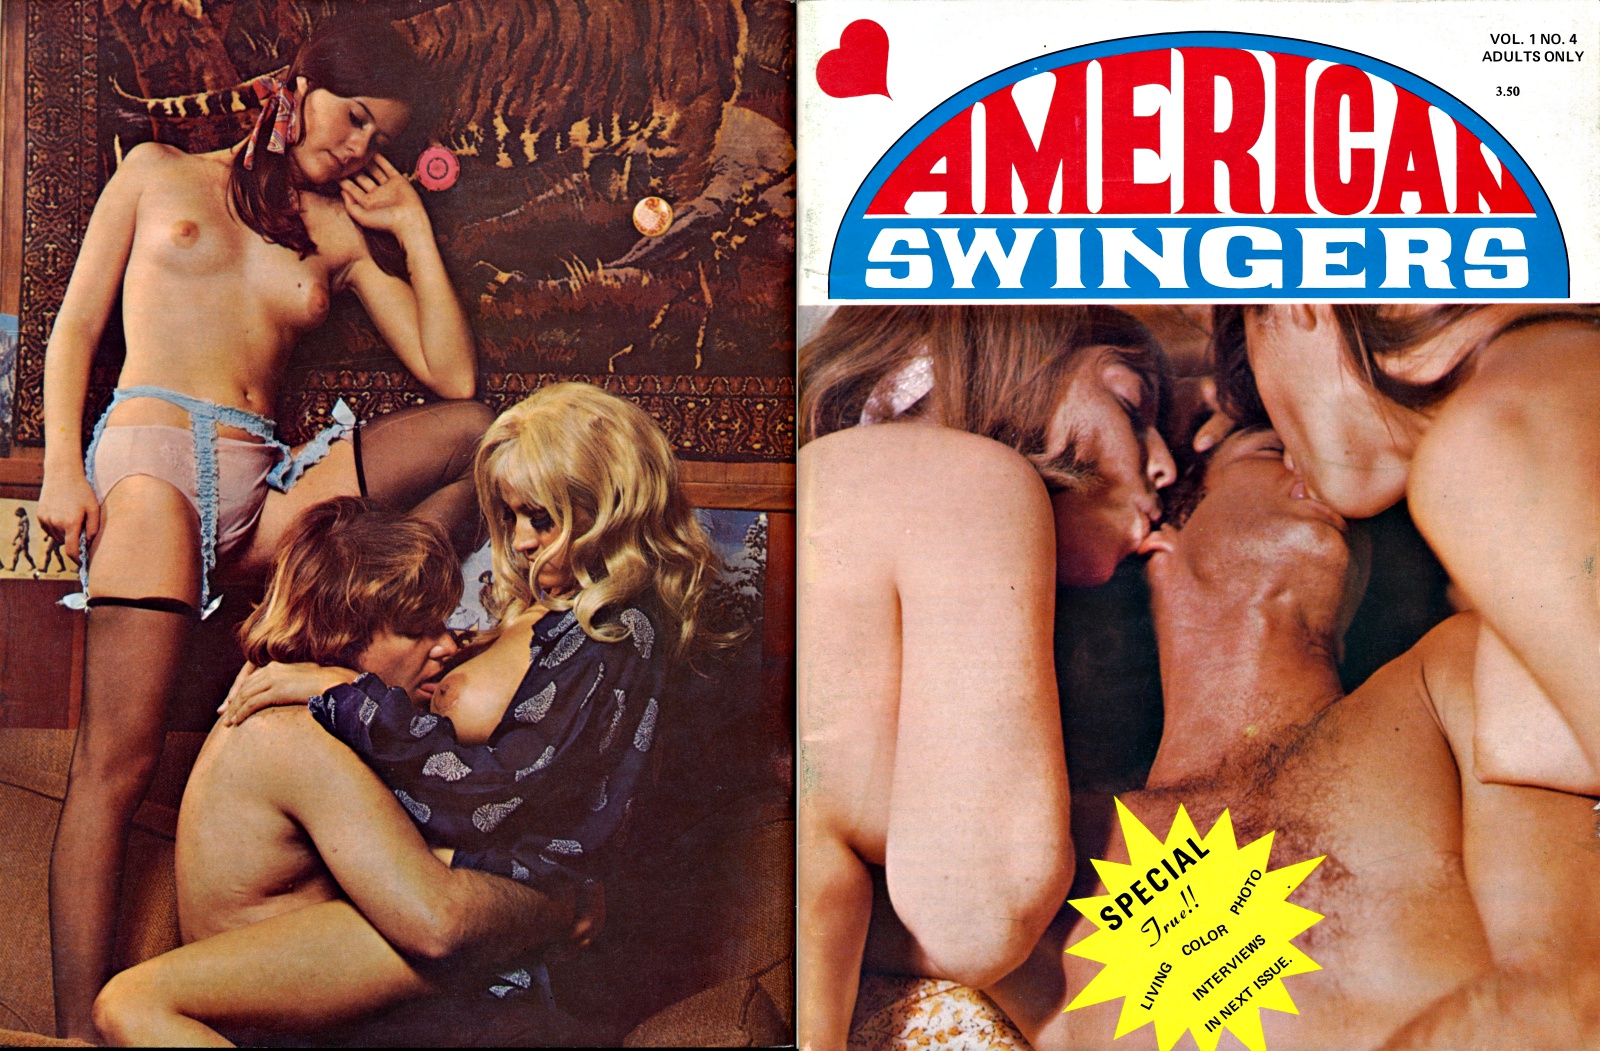 American Swingers (vintage adult magazine, 1970) by American Publications, Inc. Very Good (1970) Well-Stacked Books